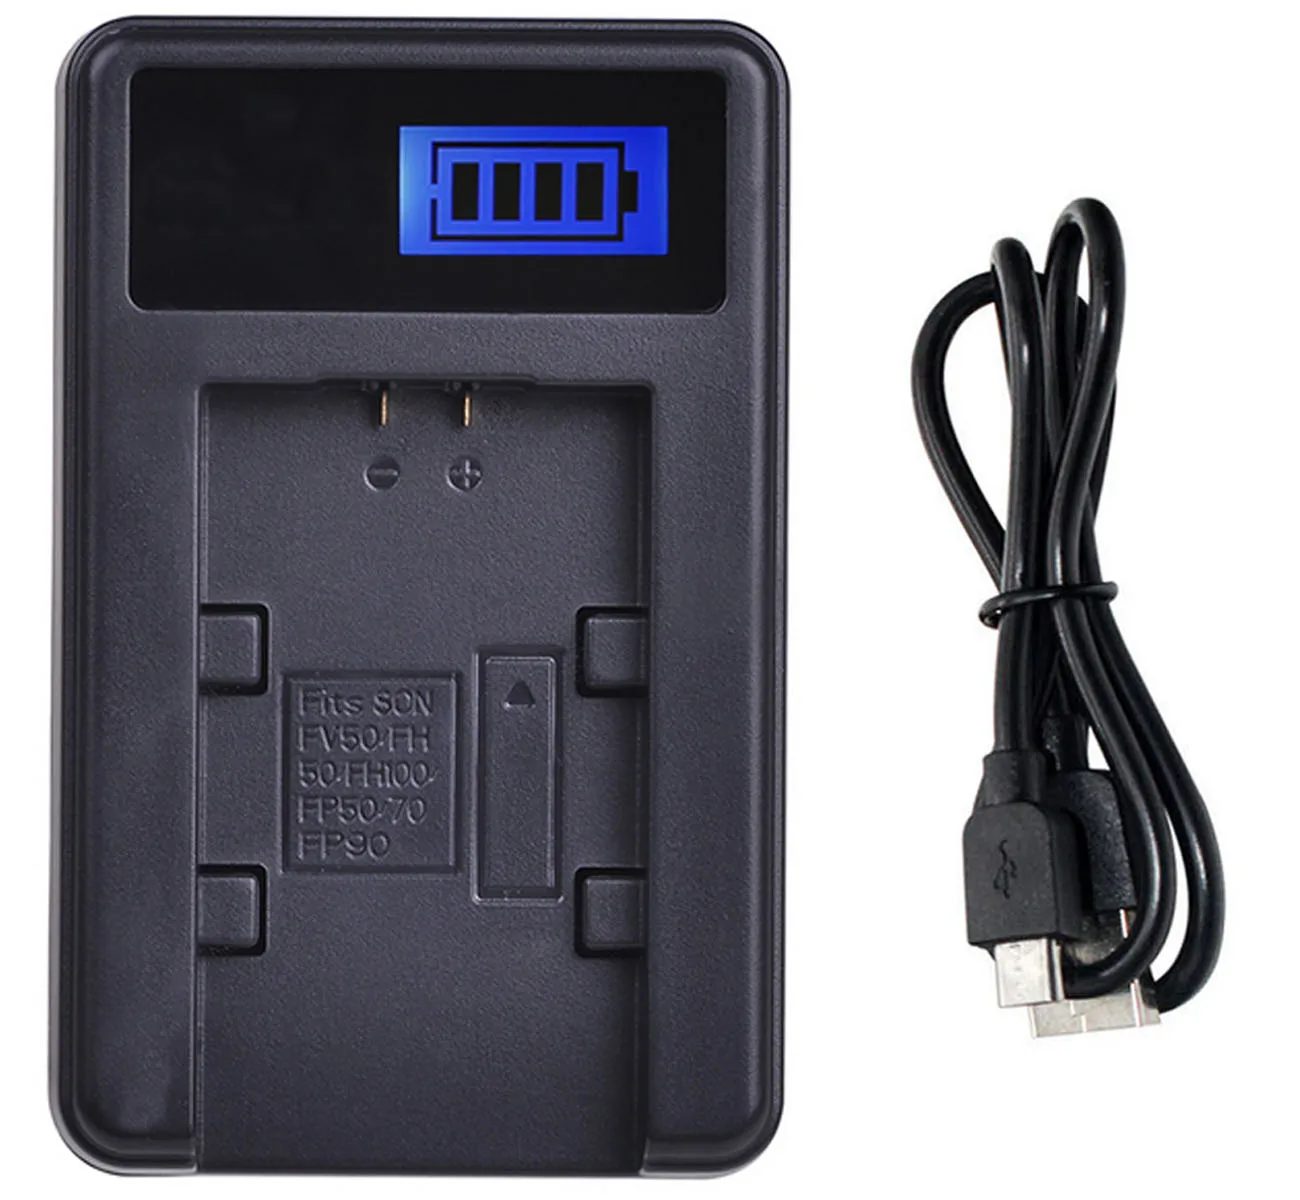 HDR-CX380 Car/Home Charger For Sony HDR-CX370 HDR-CX400 HDR-CX550E & More. Complete Starter Kit NP-FV100 Rechargeable Battery HDR-CX370V HDR-CX510 Camcorder HDR-CX550 HDR-CX390 HDR-CX410 HDR-CX430 